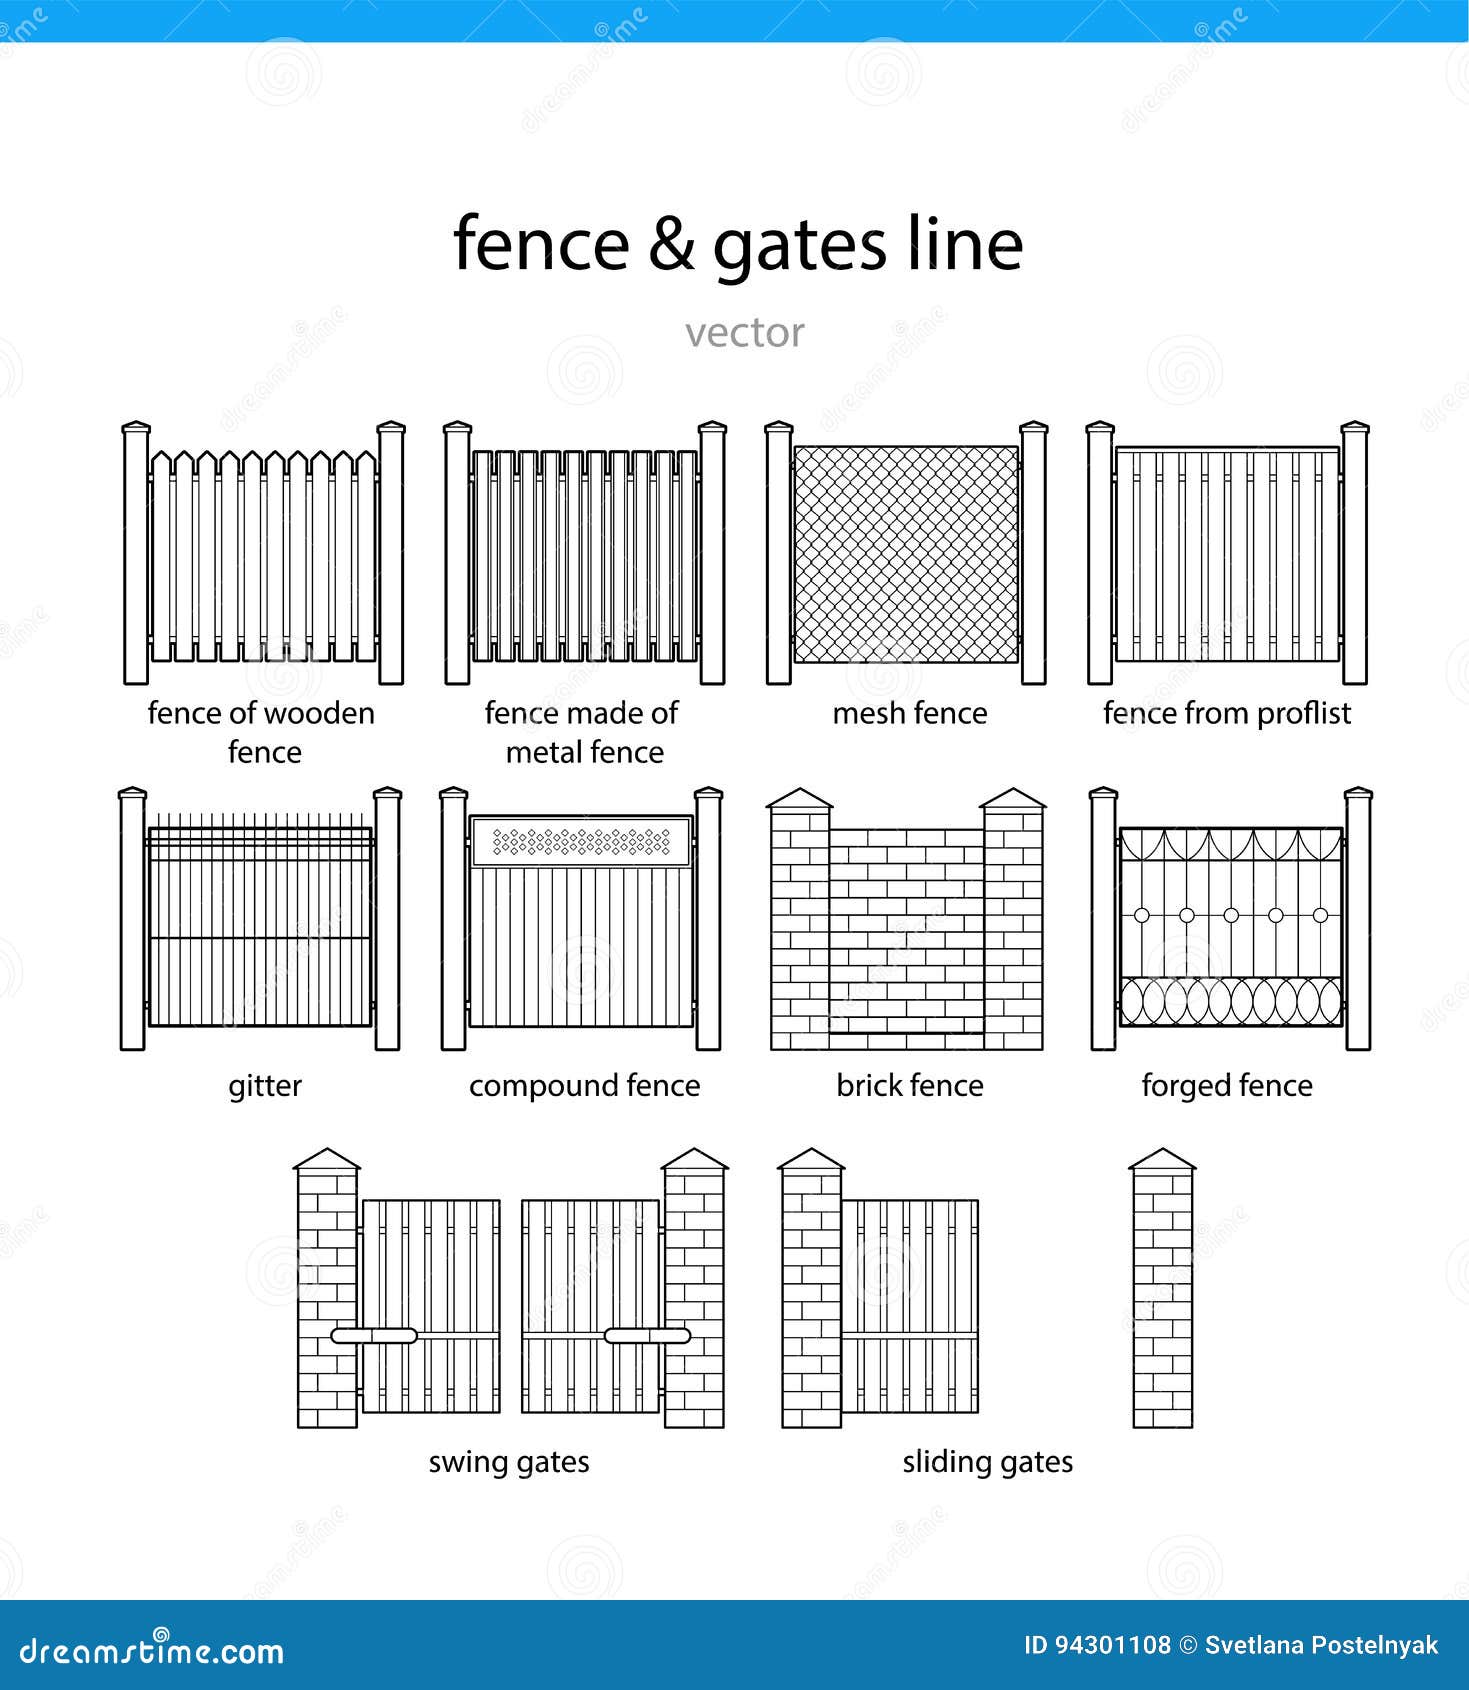 Ace Fence Company Austin - Fence Contractor